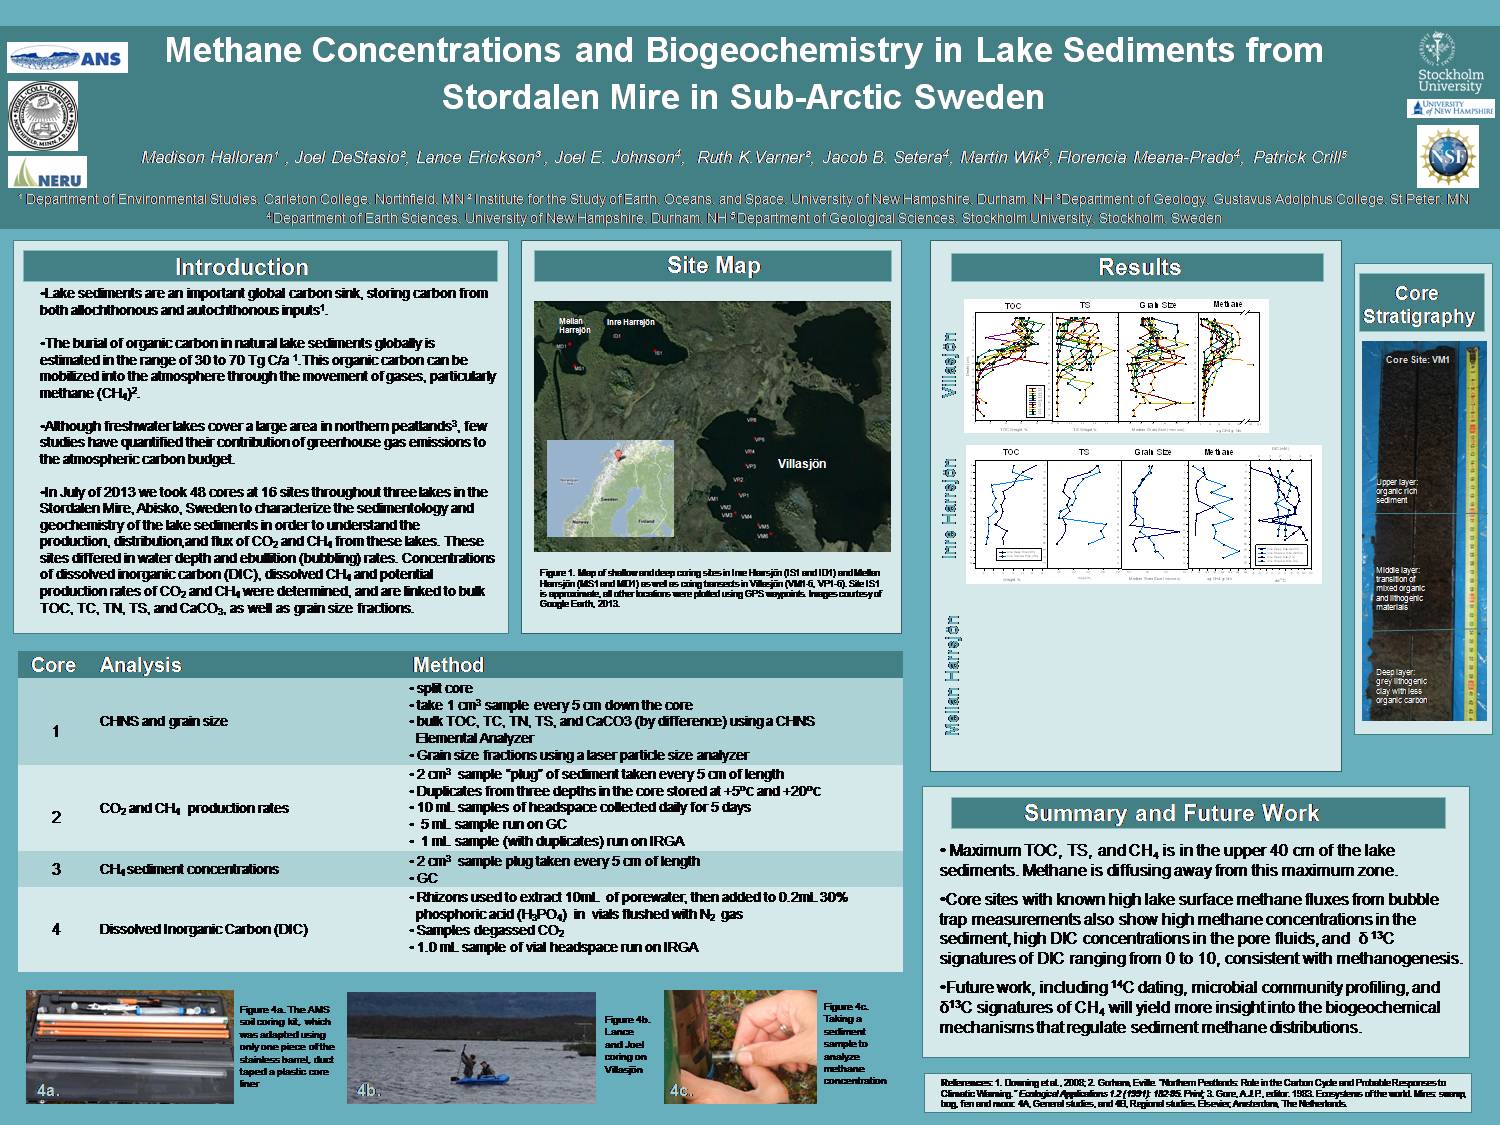 Methane Concentrations And Biogeochemistry In Lake Sediments From Stordalen Mire In Sub-Arctic Sweden  by halloram